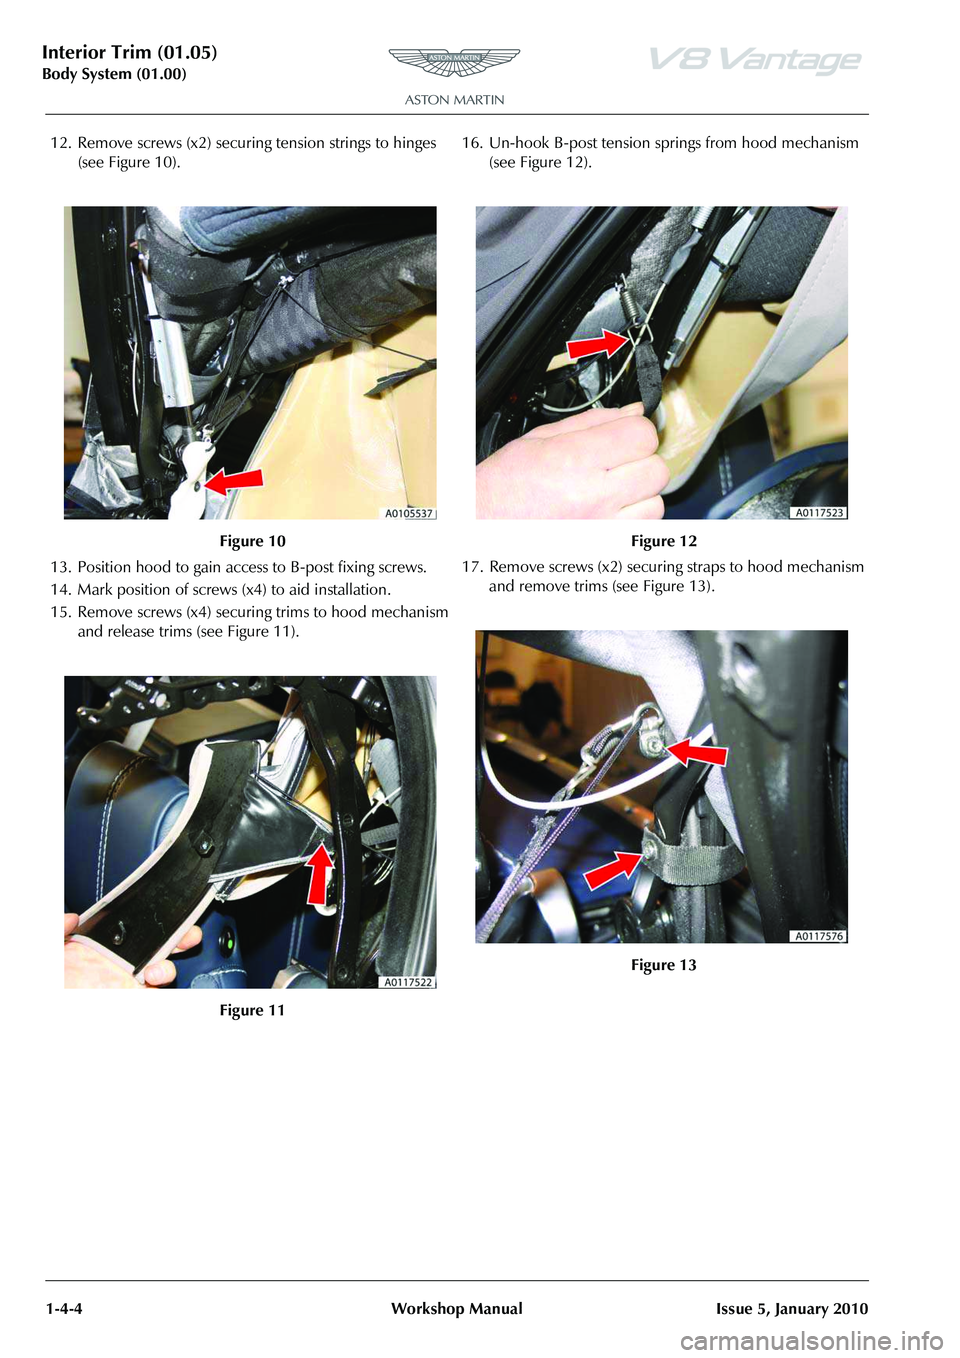 ASTON MARTIN V8 VANTAGE 2010  Workshop Manual Interior Trim (01.05)
Body System (01.00)1-4-4 Workshop Manual Issue 5, January 2010
12. Remove screws (x2) securing tension strings to hinges  (see Figure 10).
13. Position hood to gain acce ss to B-